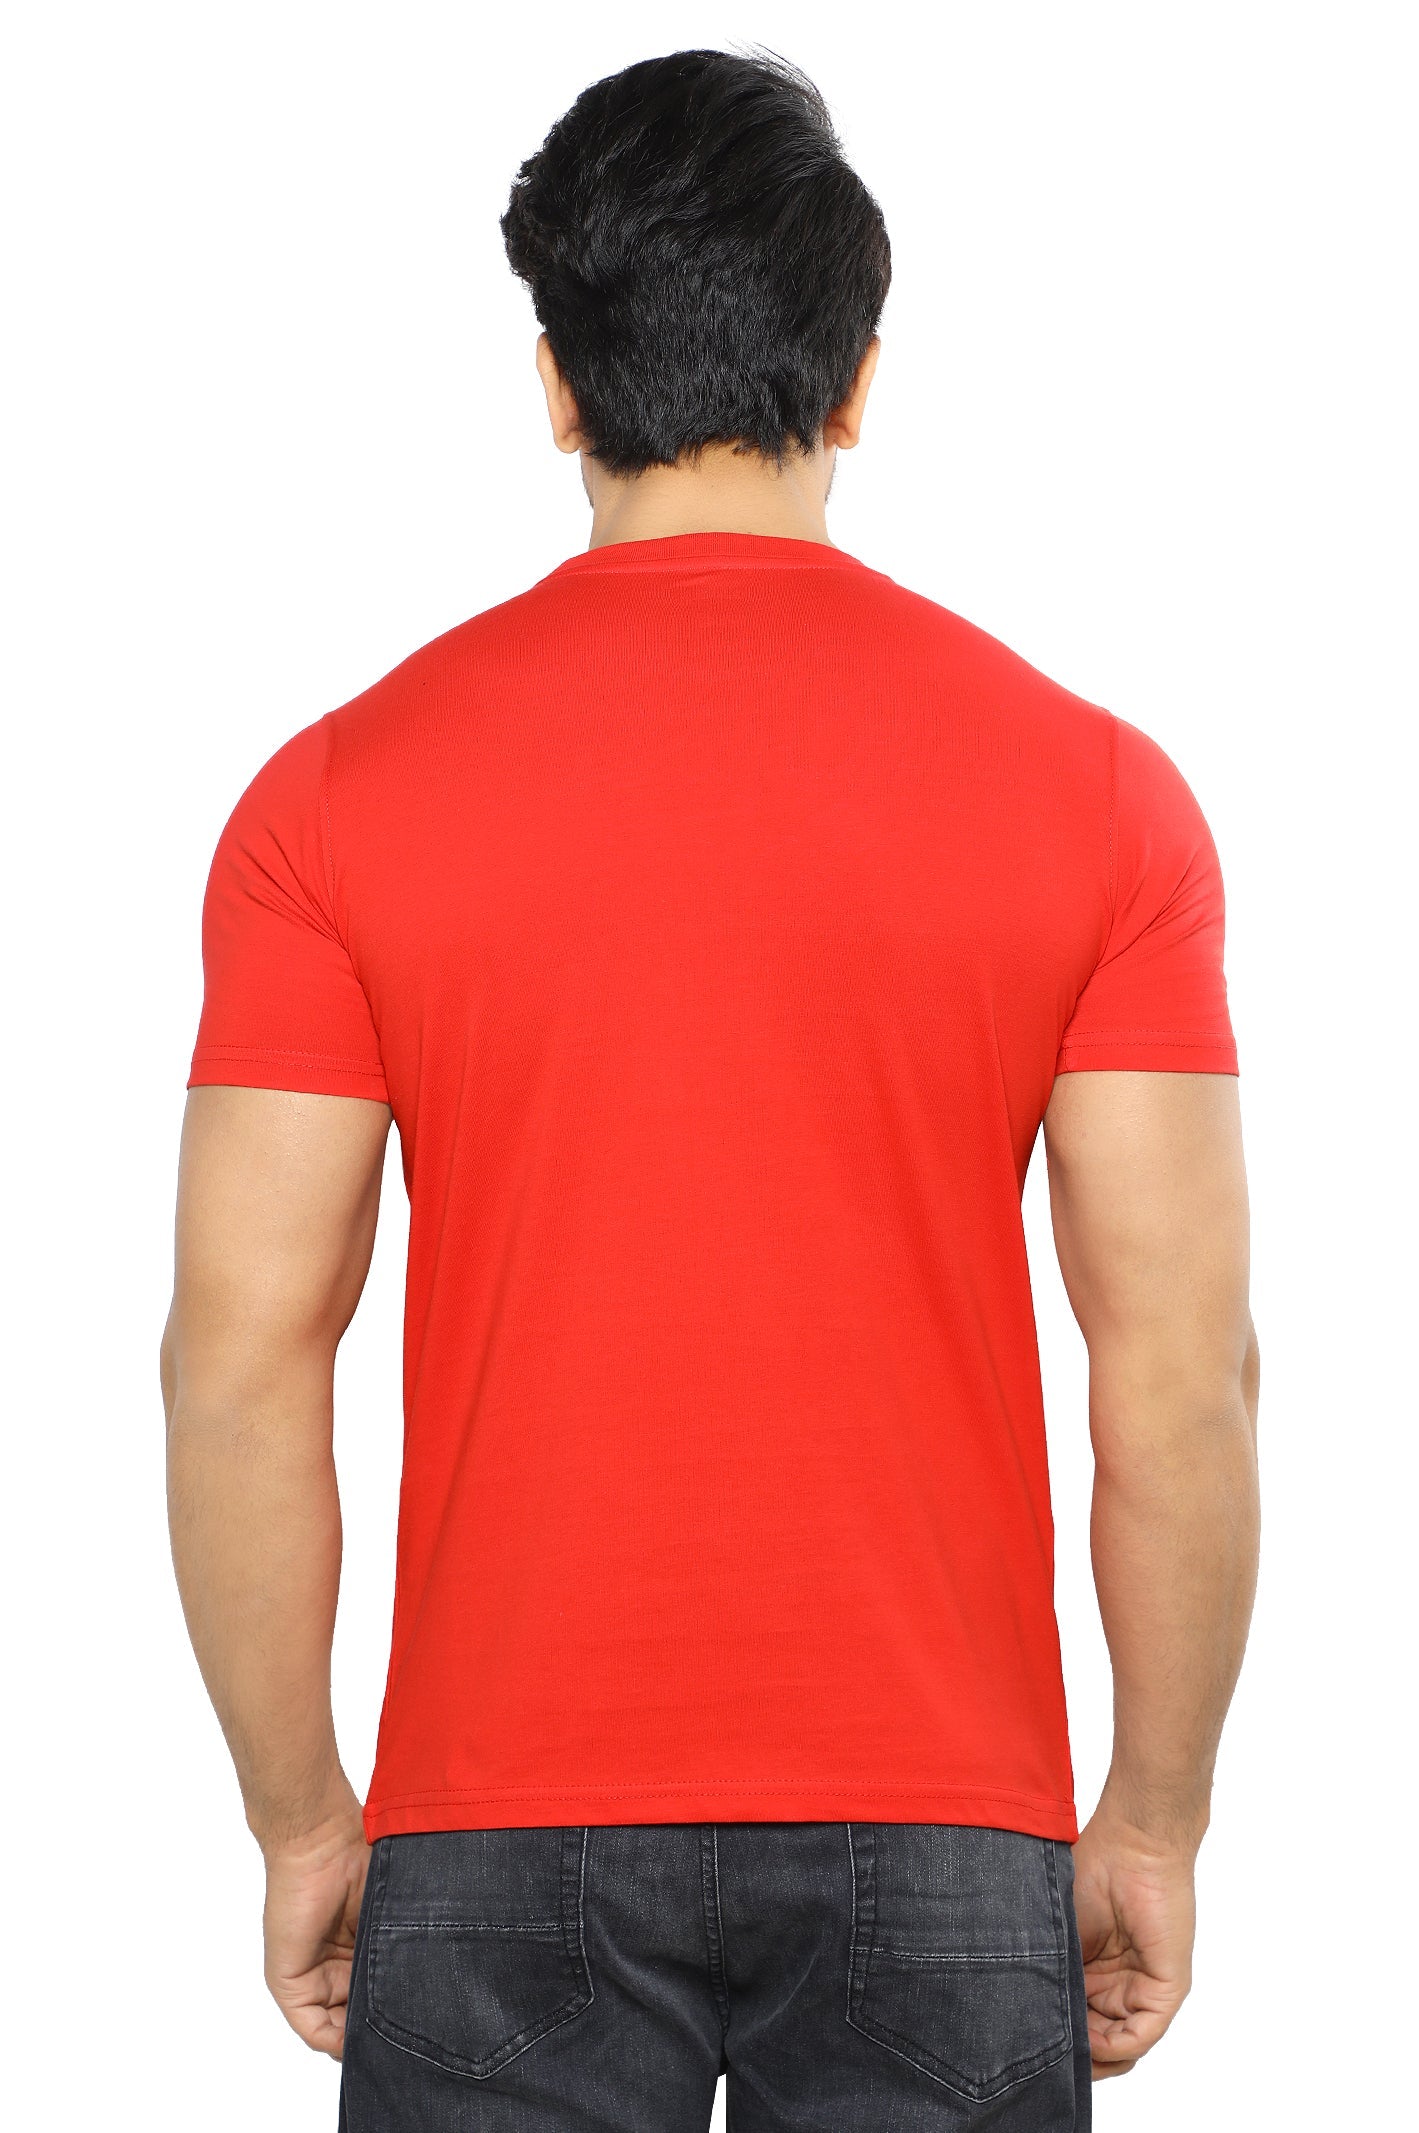 Diners Men's Round Neck T-Shirt SKU: NA858-RED - Diners